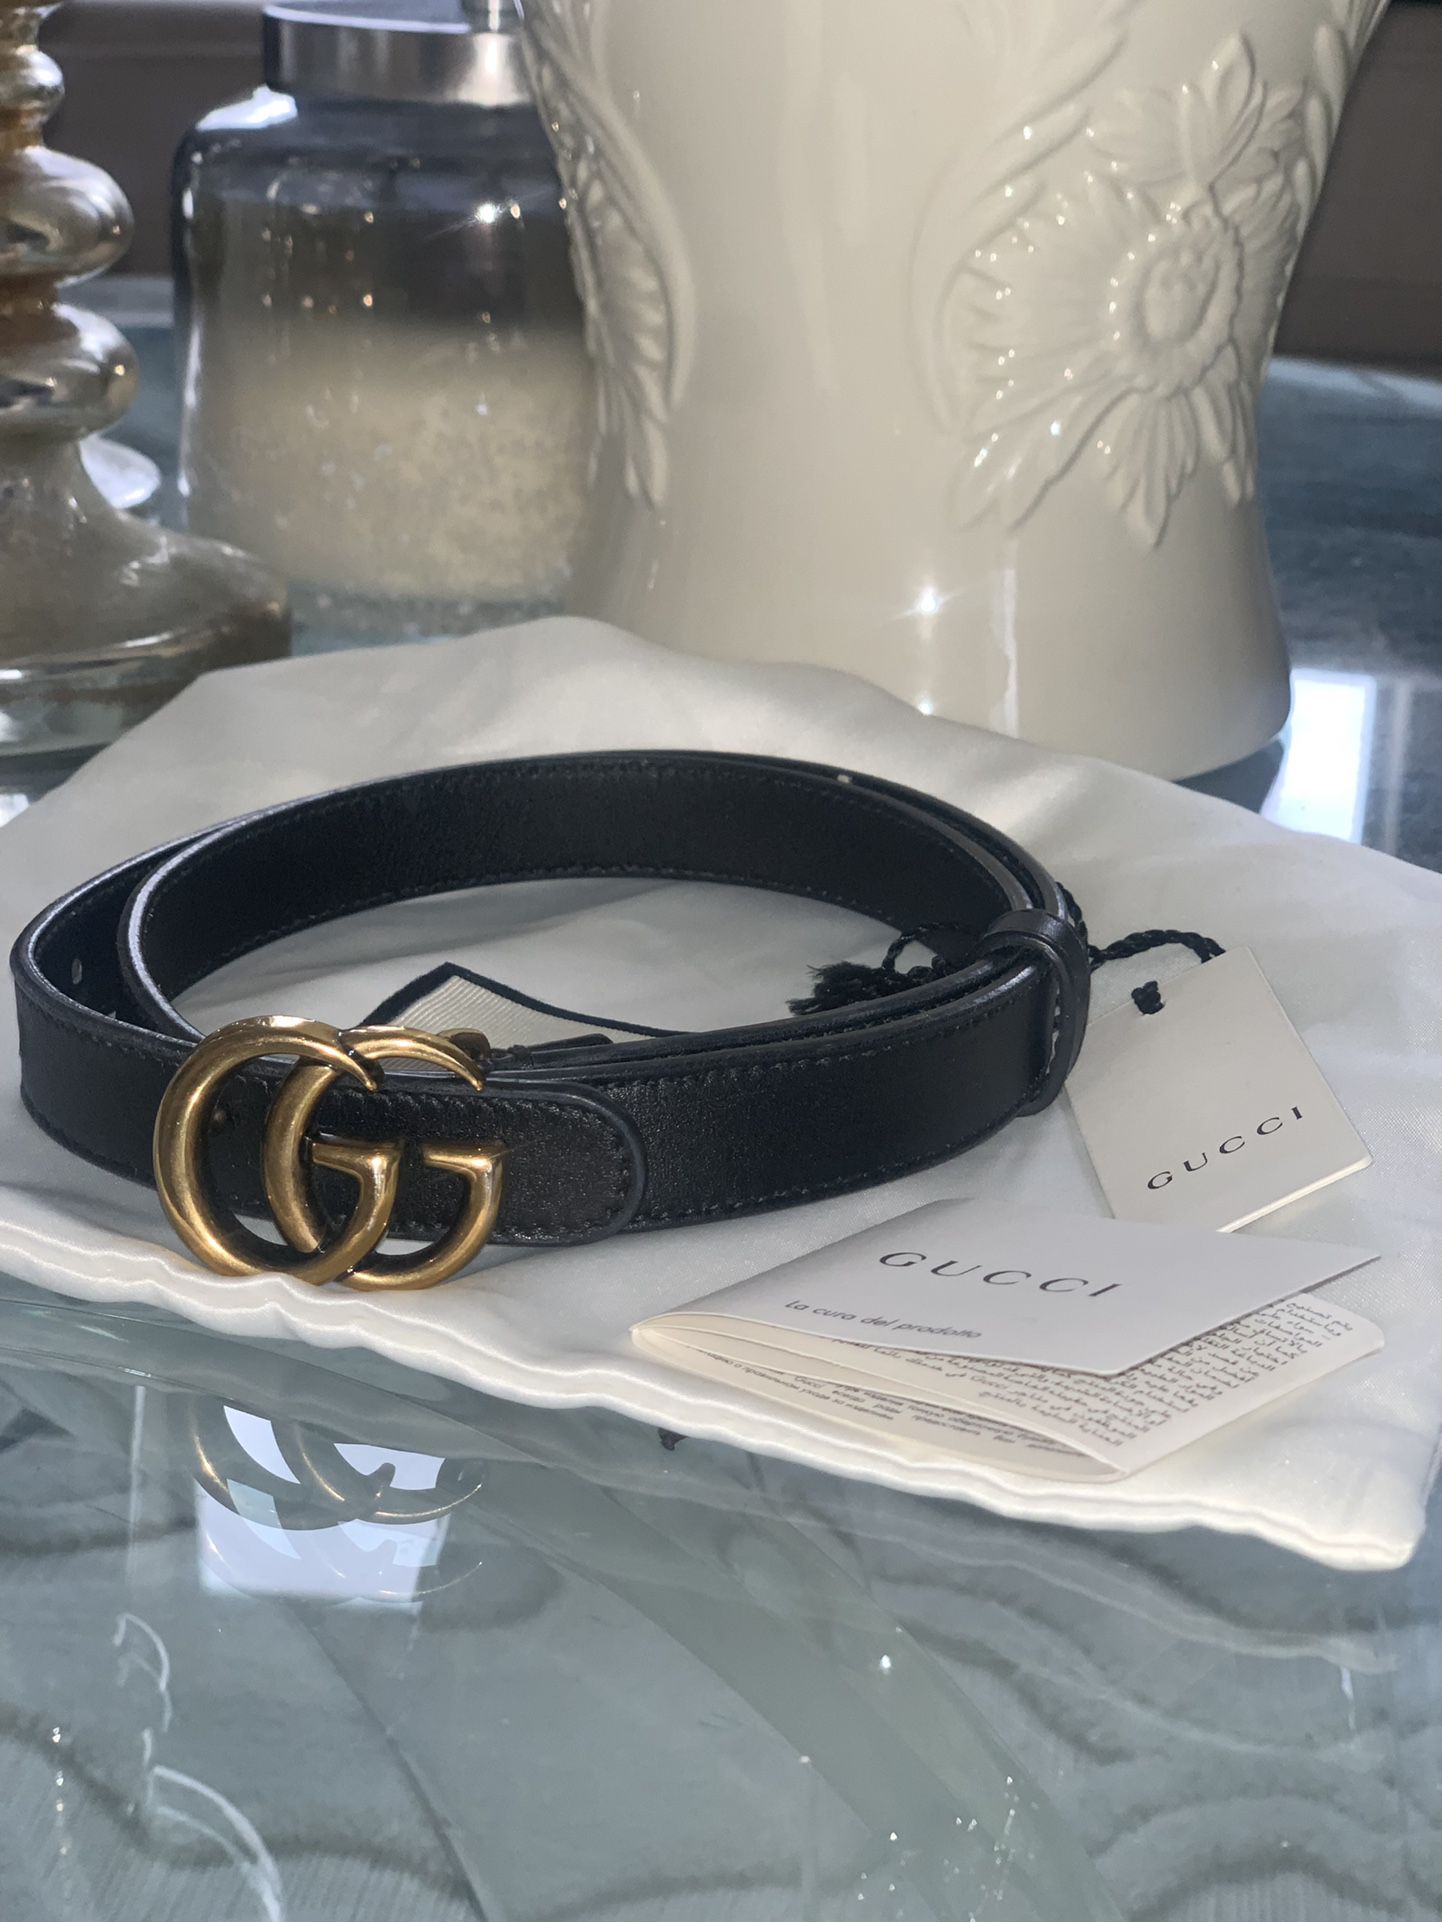 New Gucci Belt With Tags And Receipt 